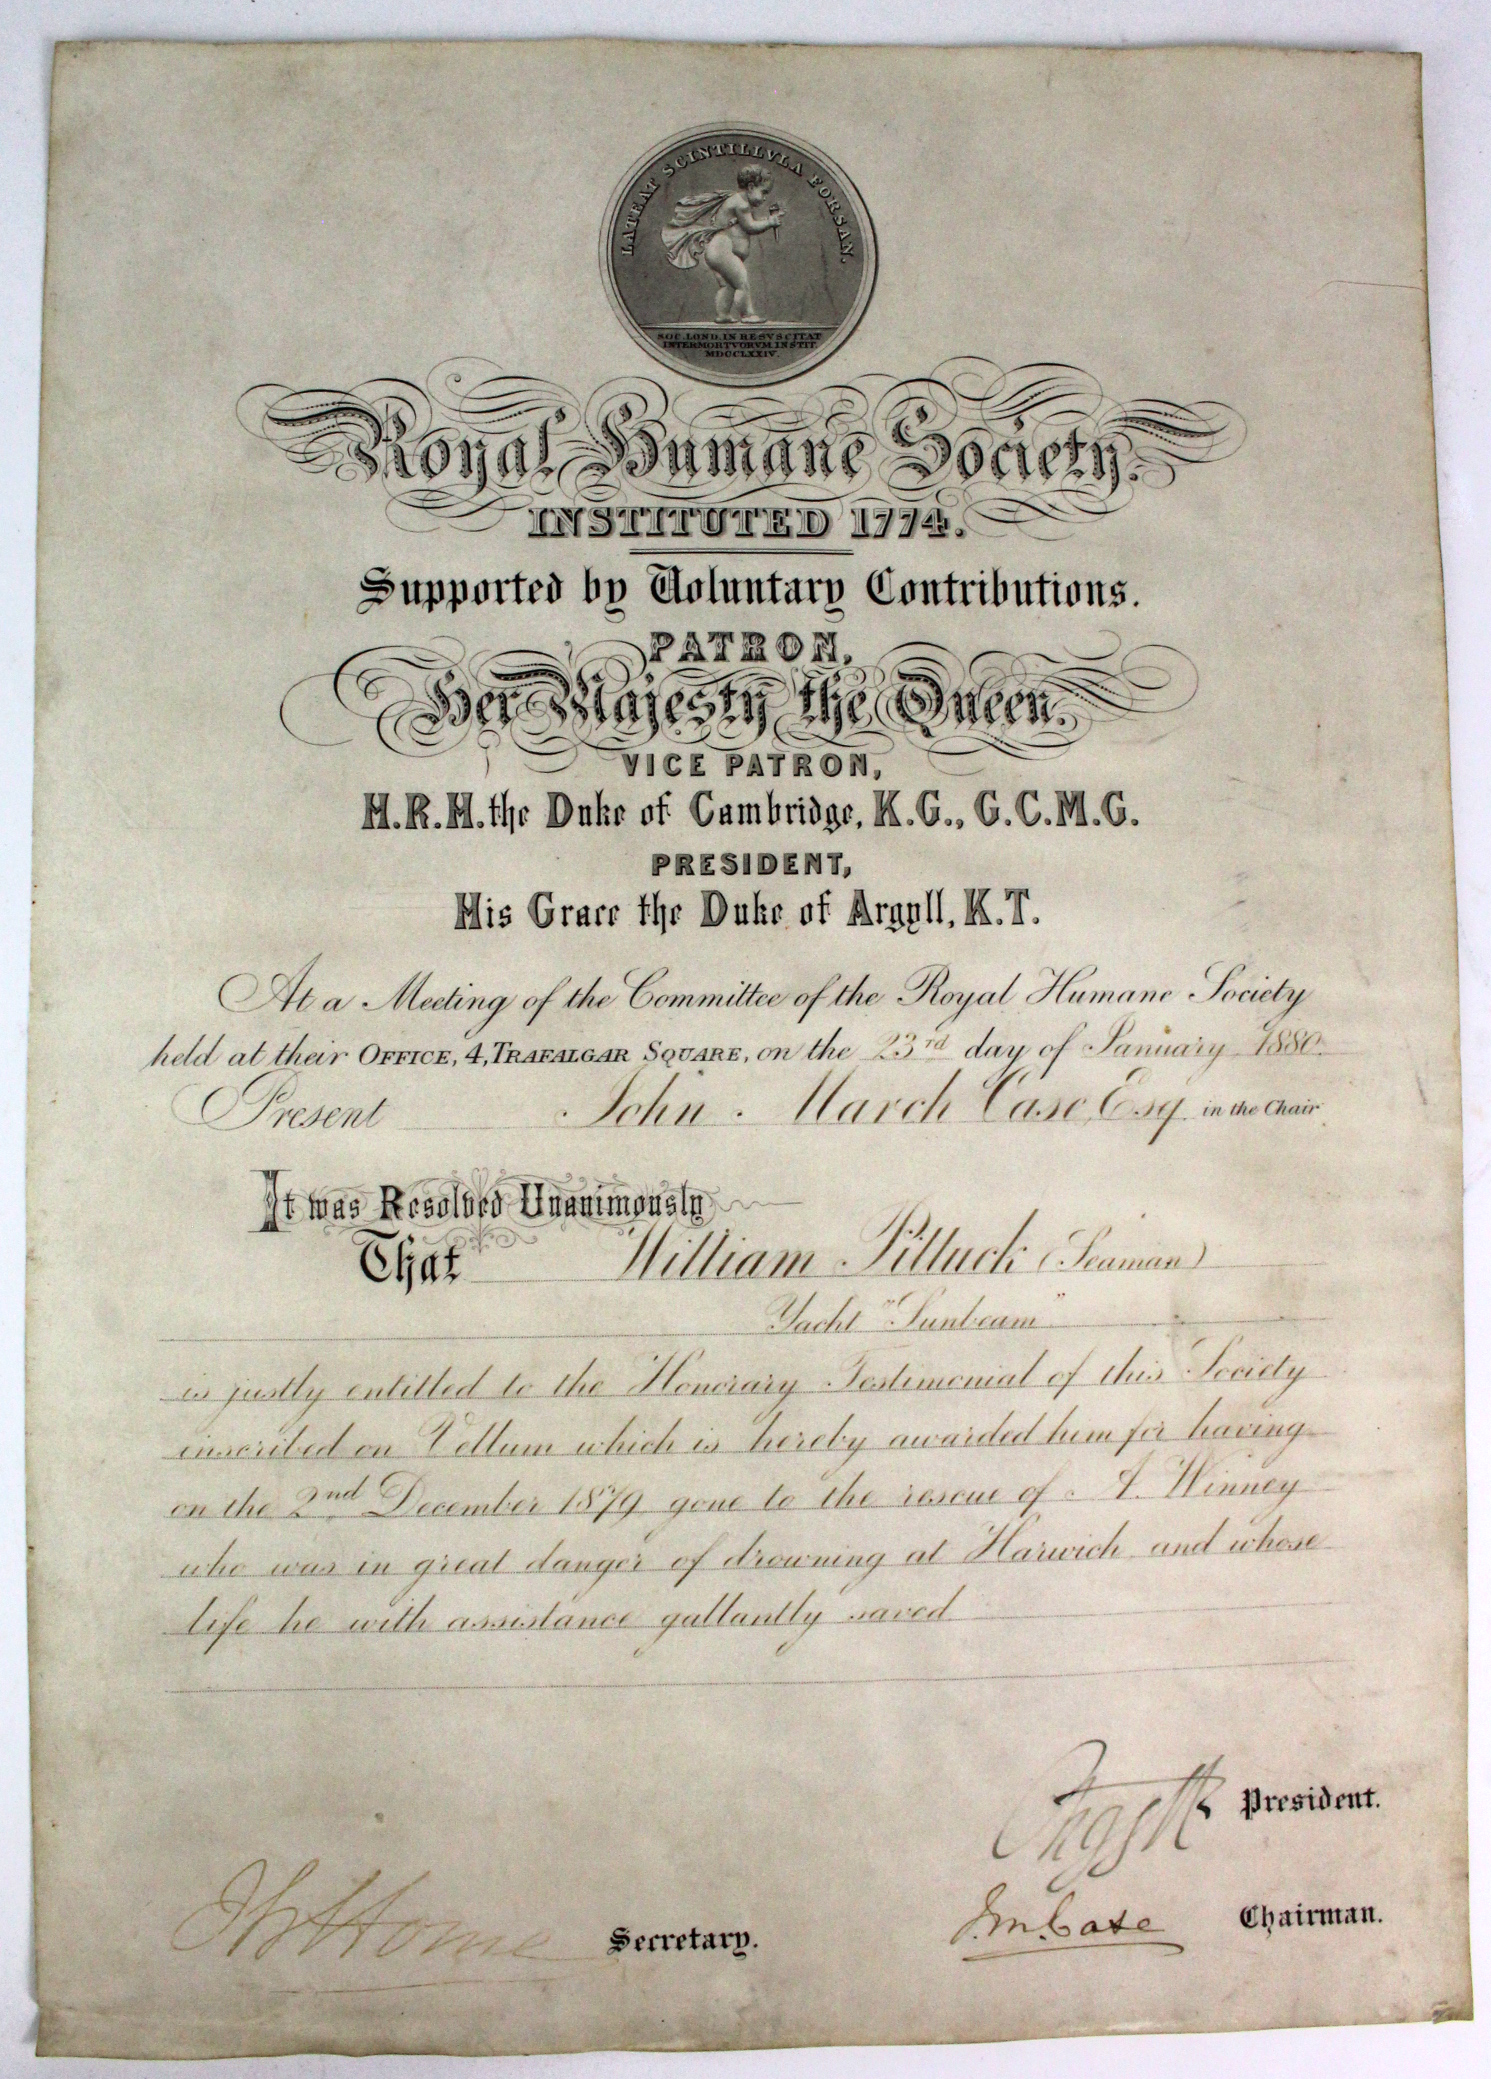 Life Saving Certificate on Vellum from the Royal Humane Society to William Pittuck for saving A.